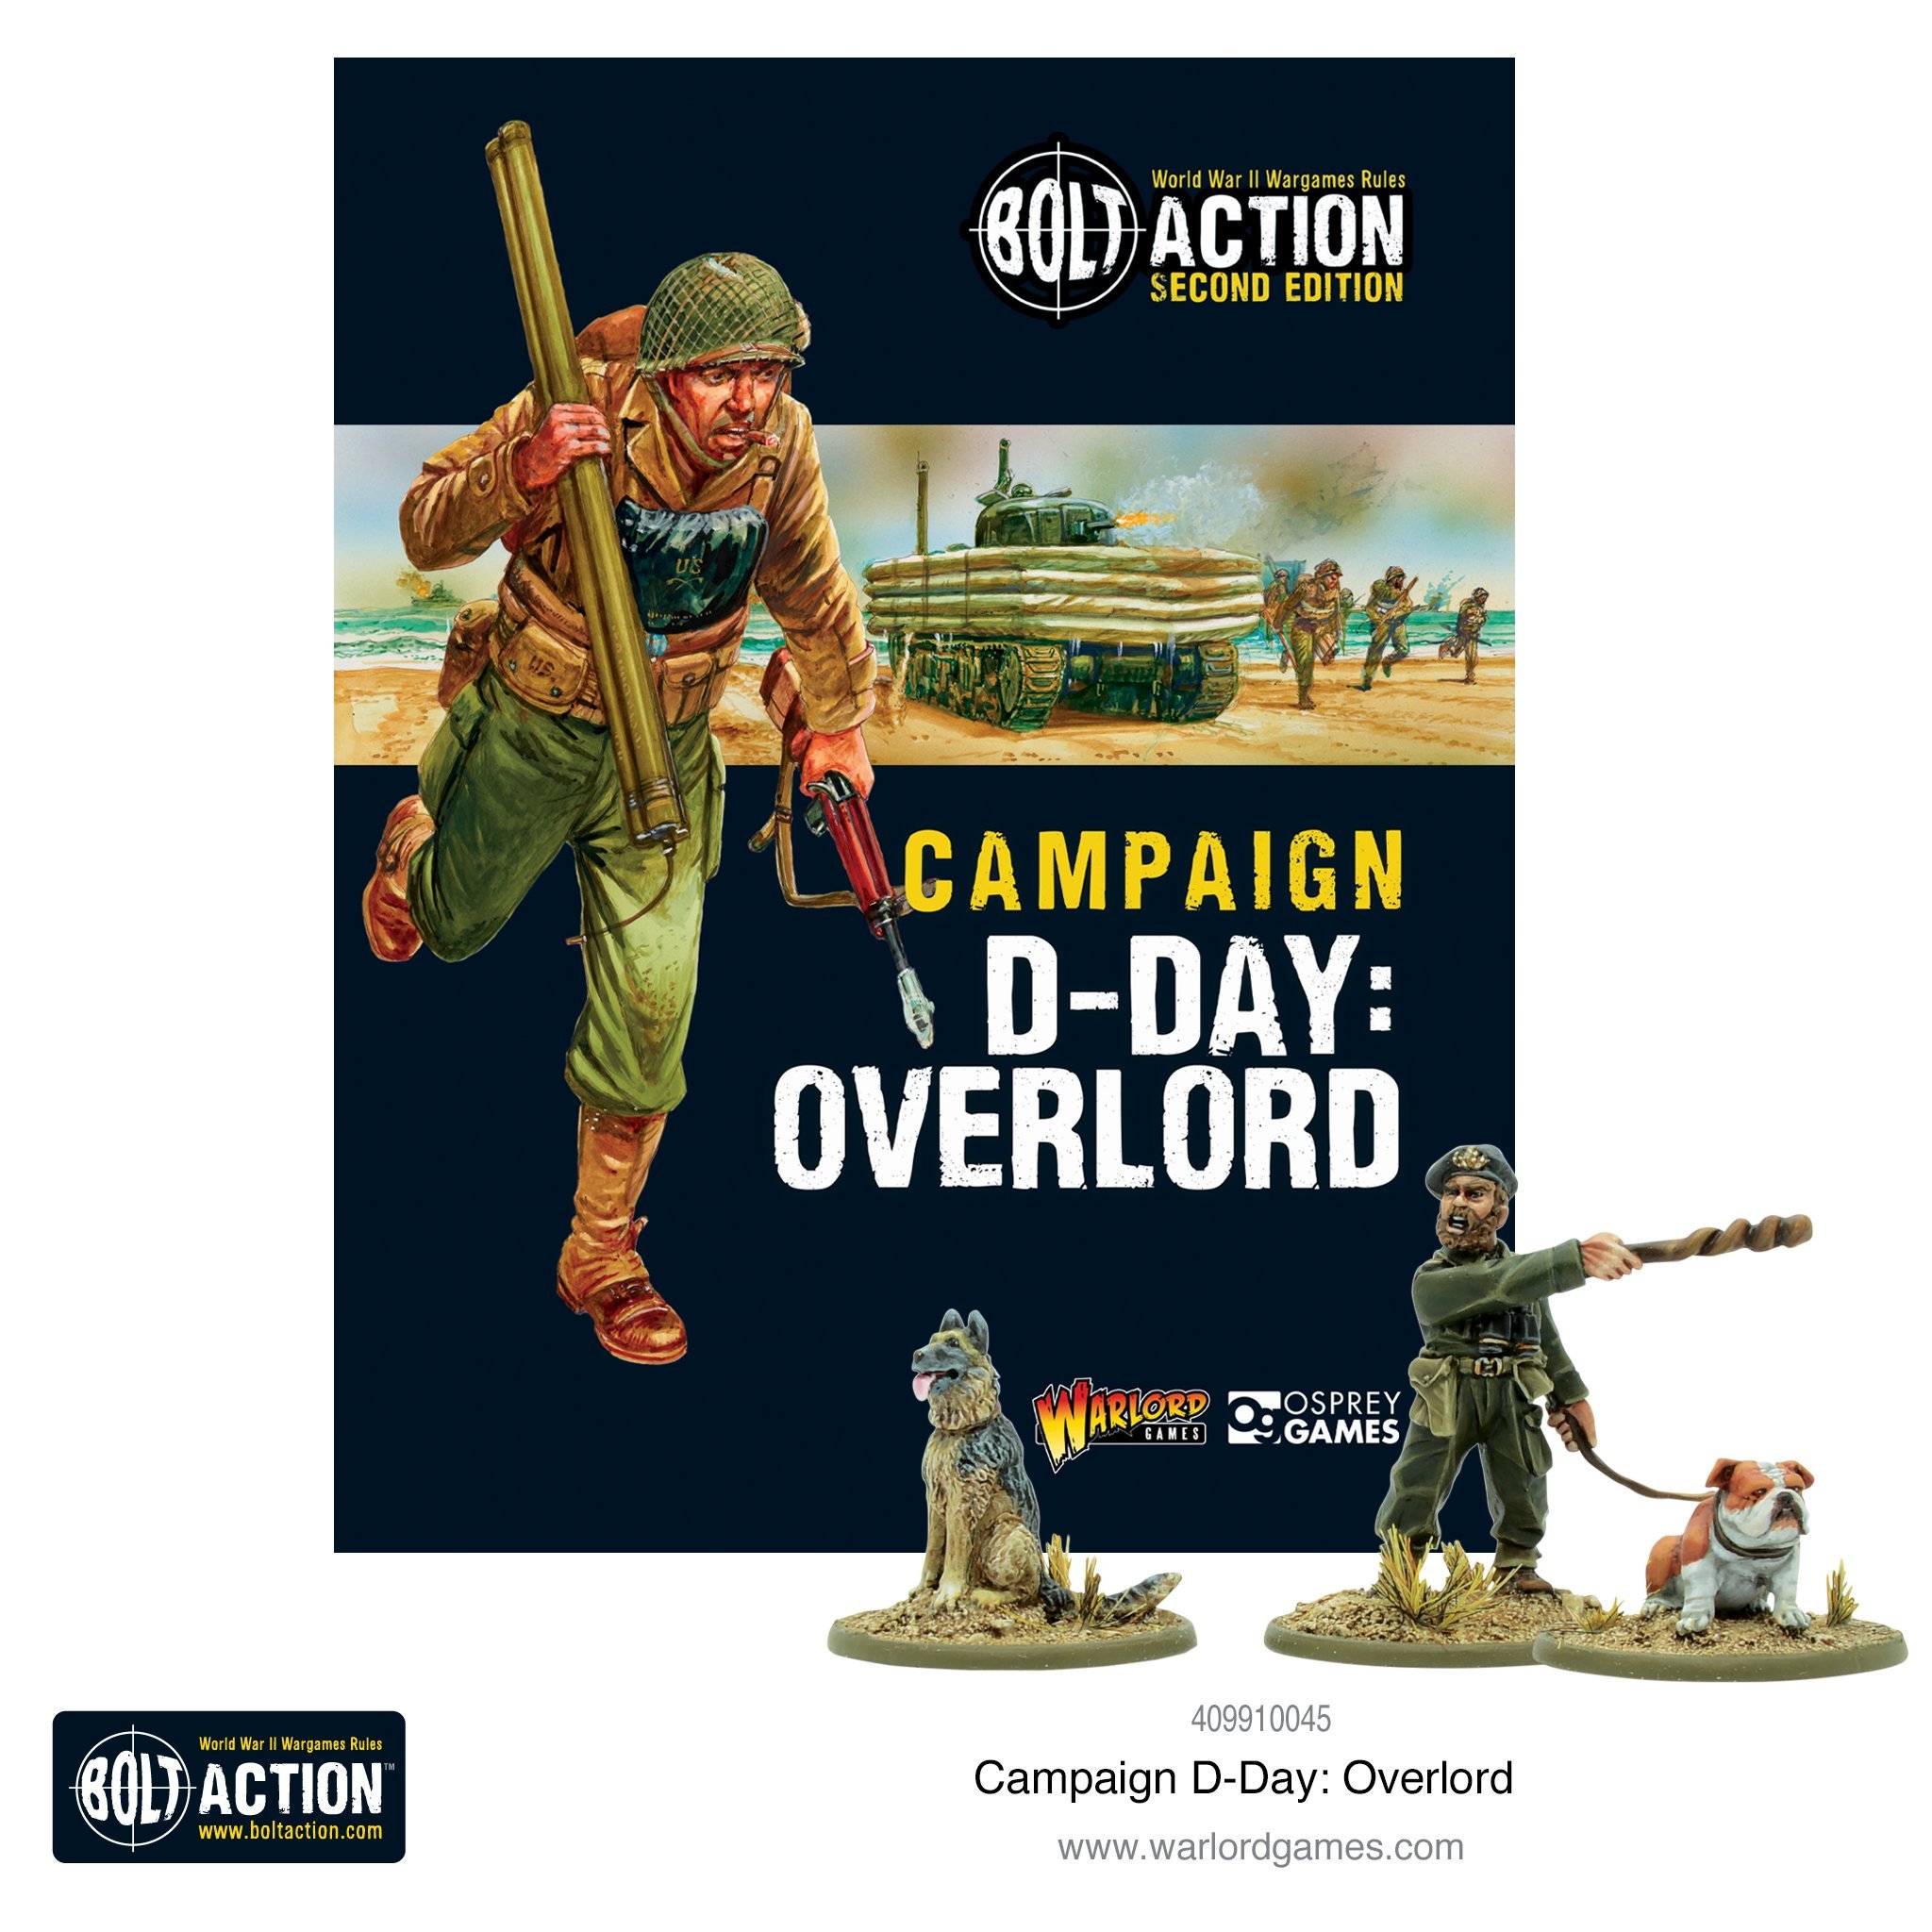 Bolt Action (2nd Edition): Campaign Overlord; D-Day book 